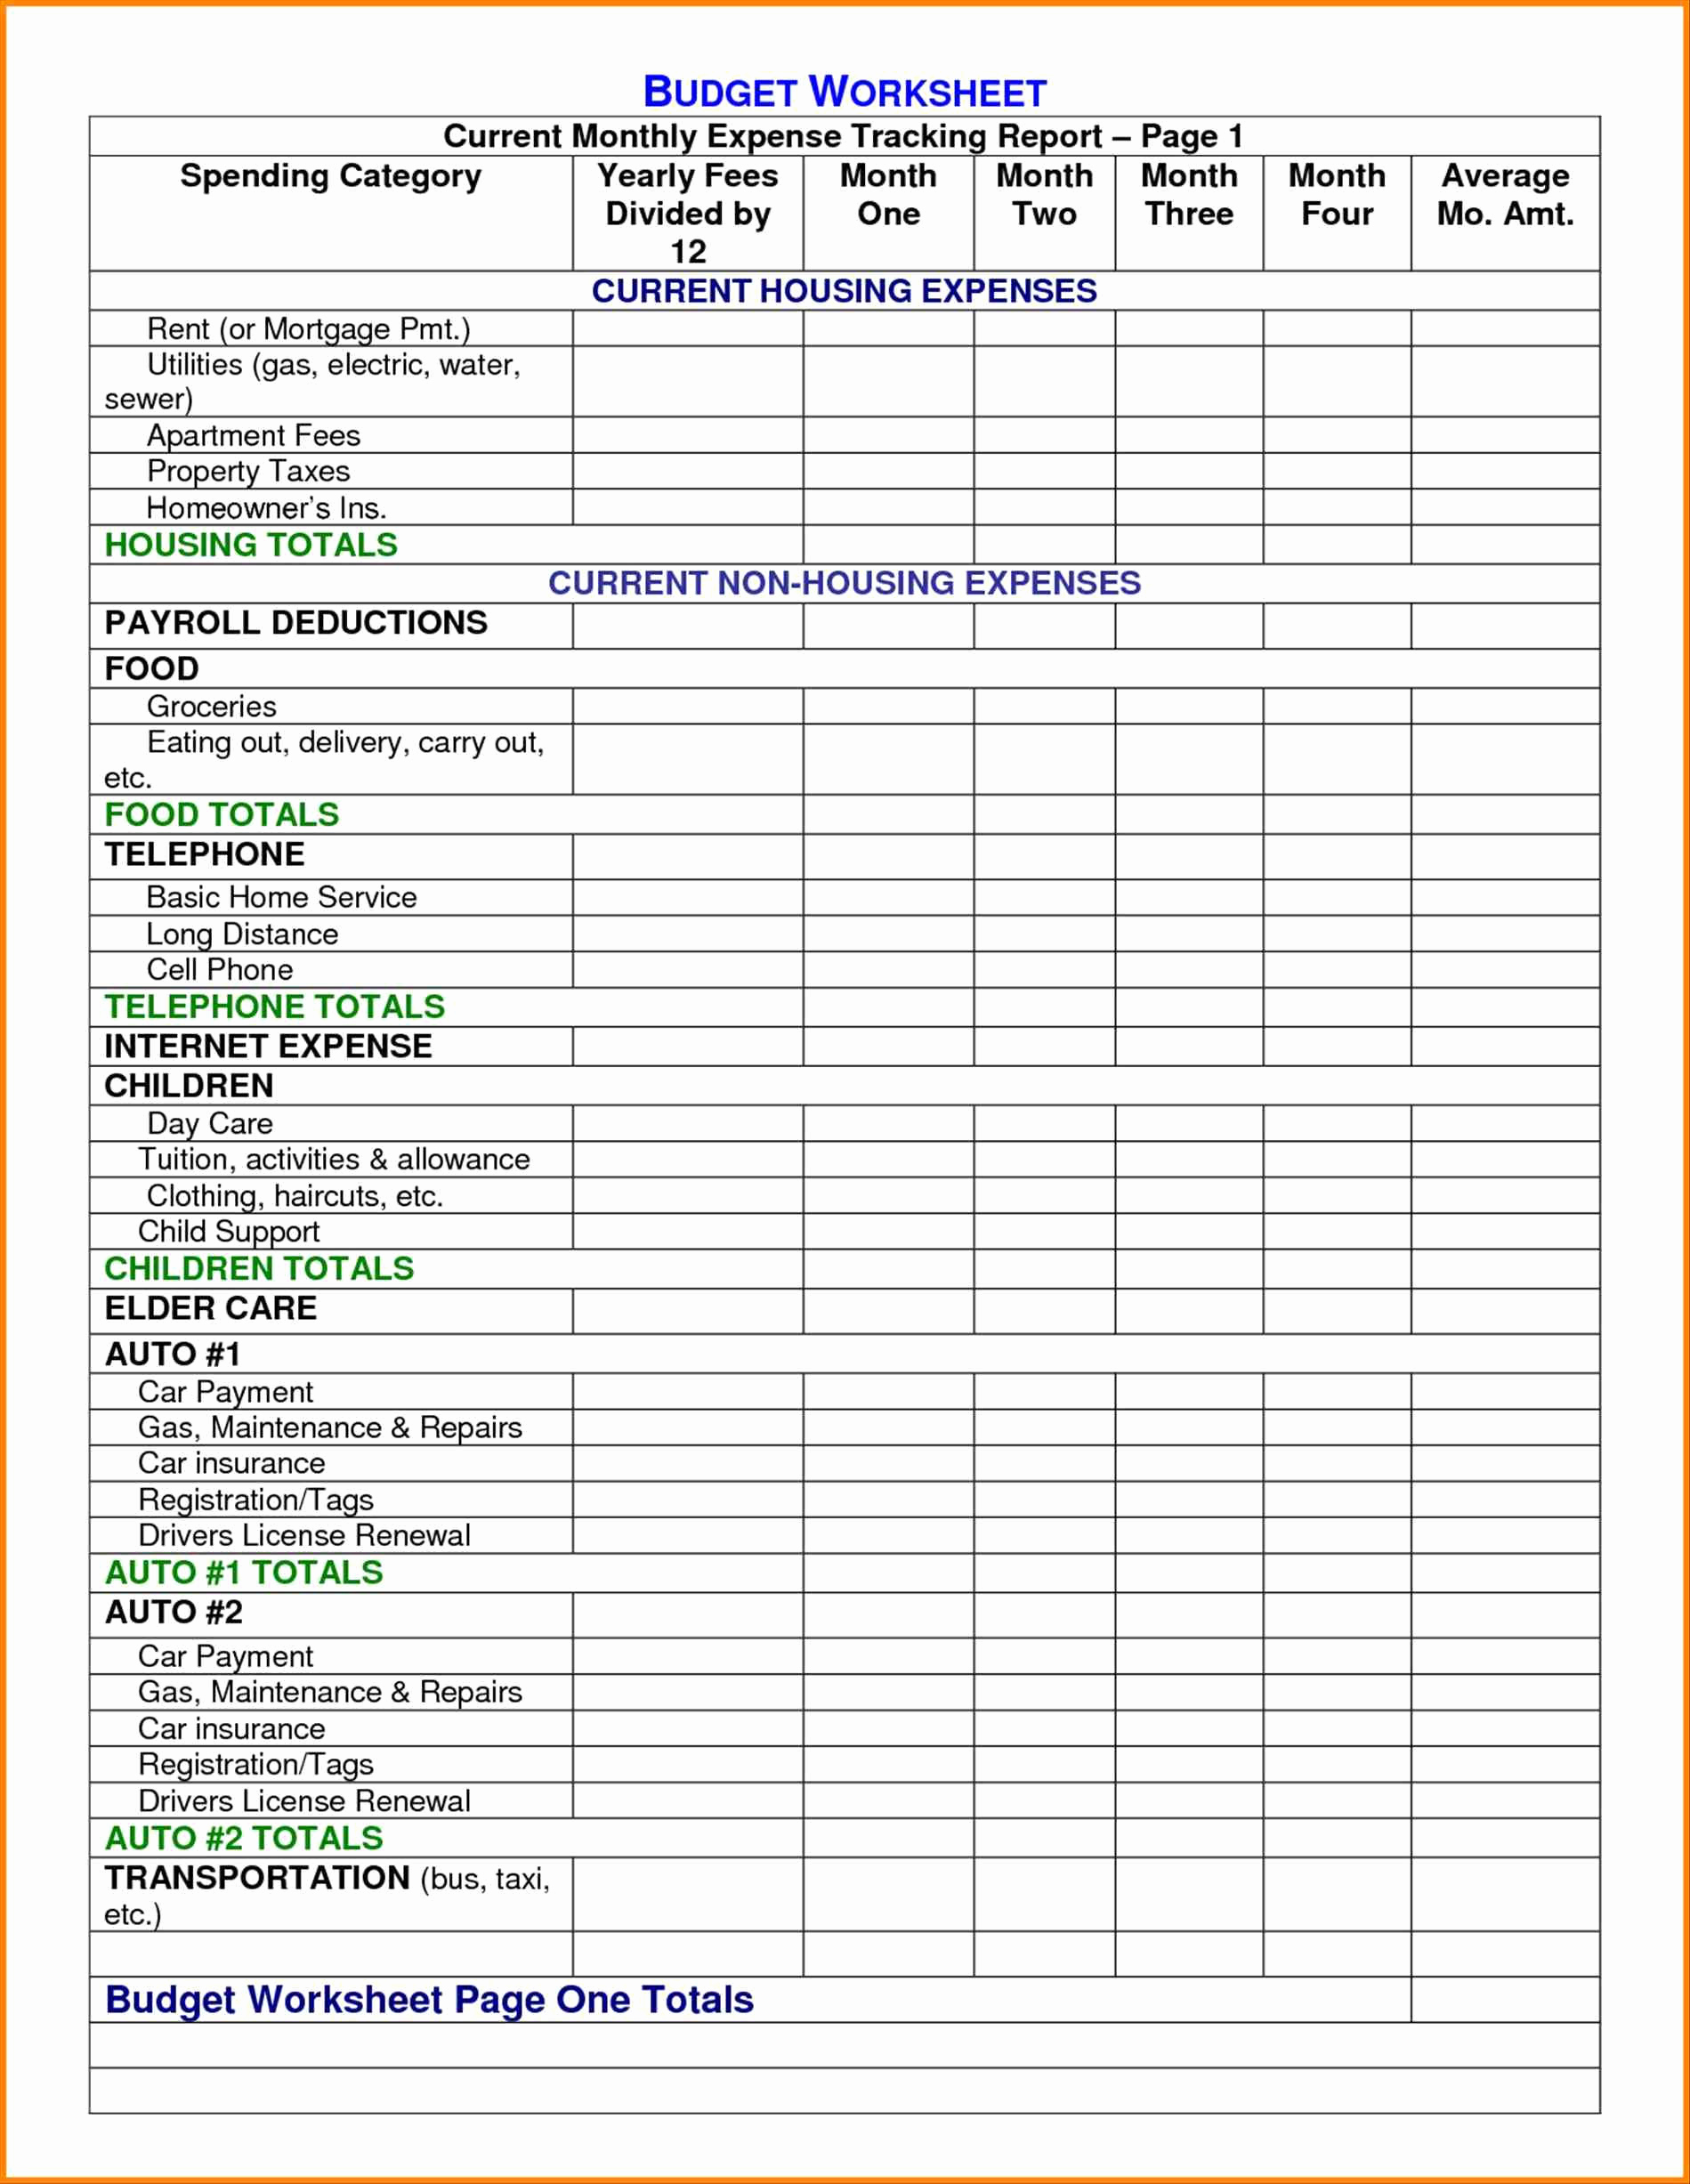 Grant Accounting Spreadsheet Inside Grant Accounting Spreadsheets Archives  Parttime Jobs